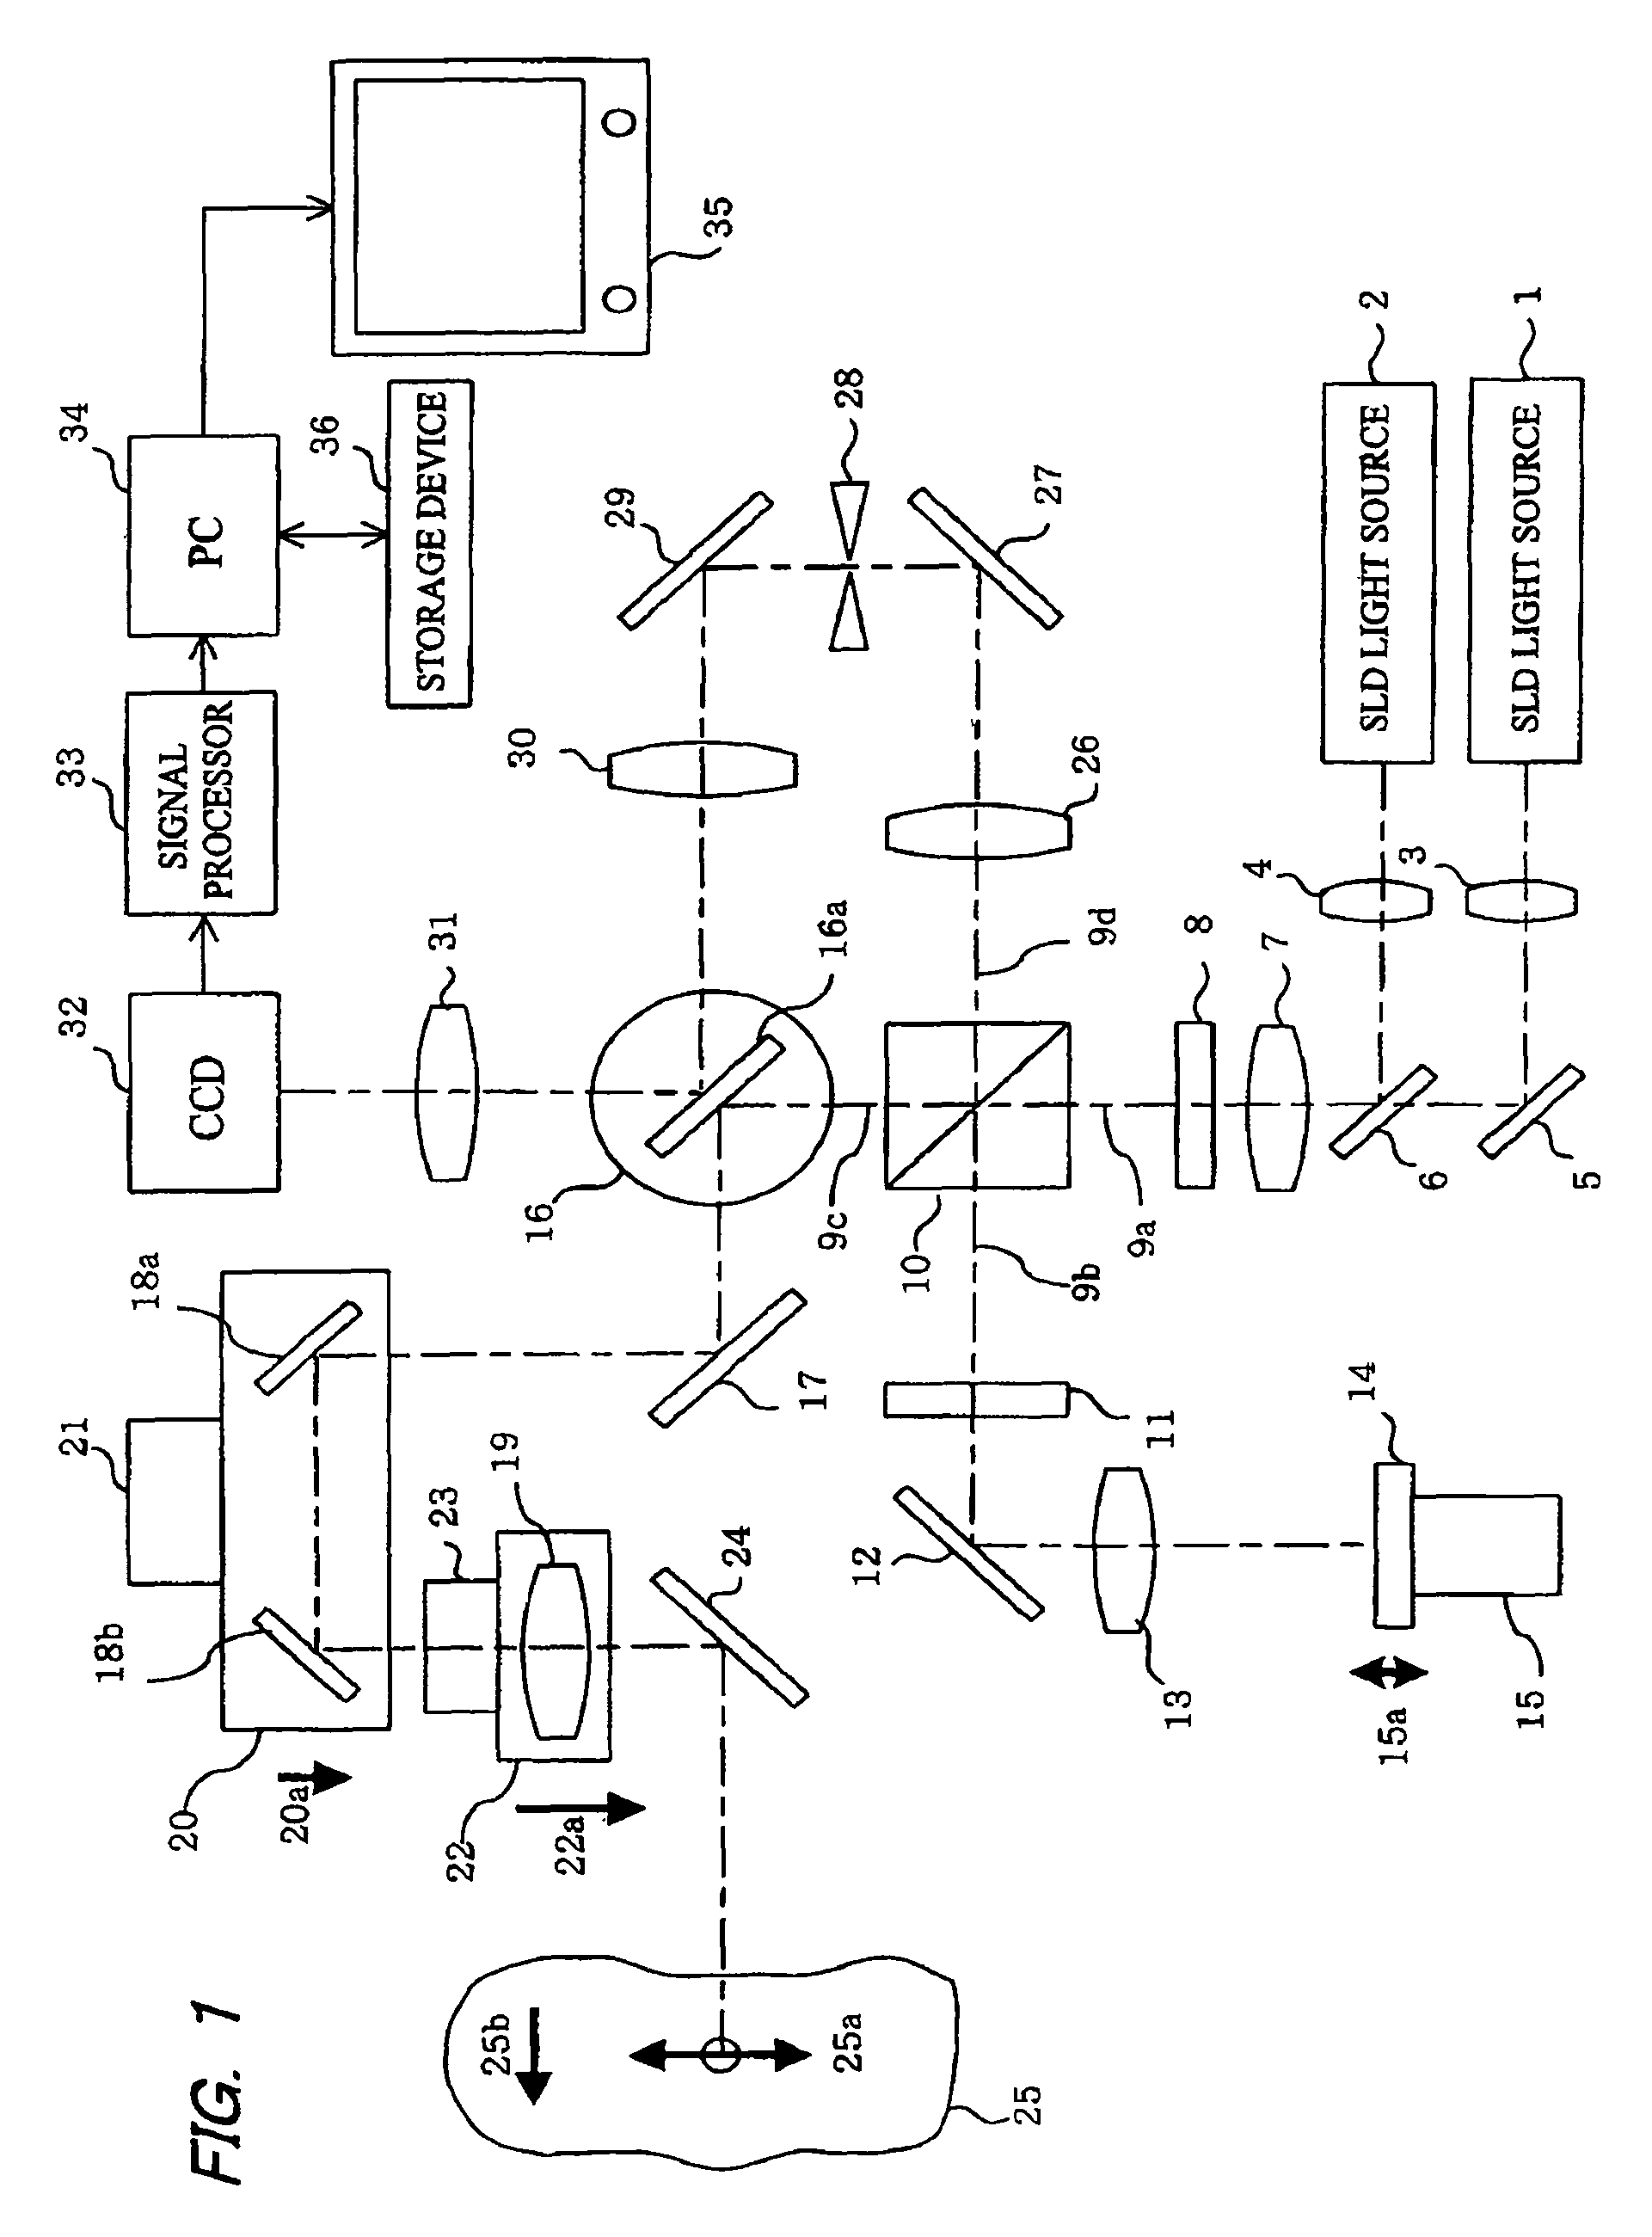 Optical coherence tomography apparatus